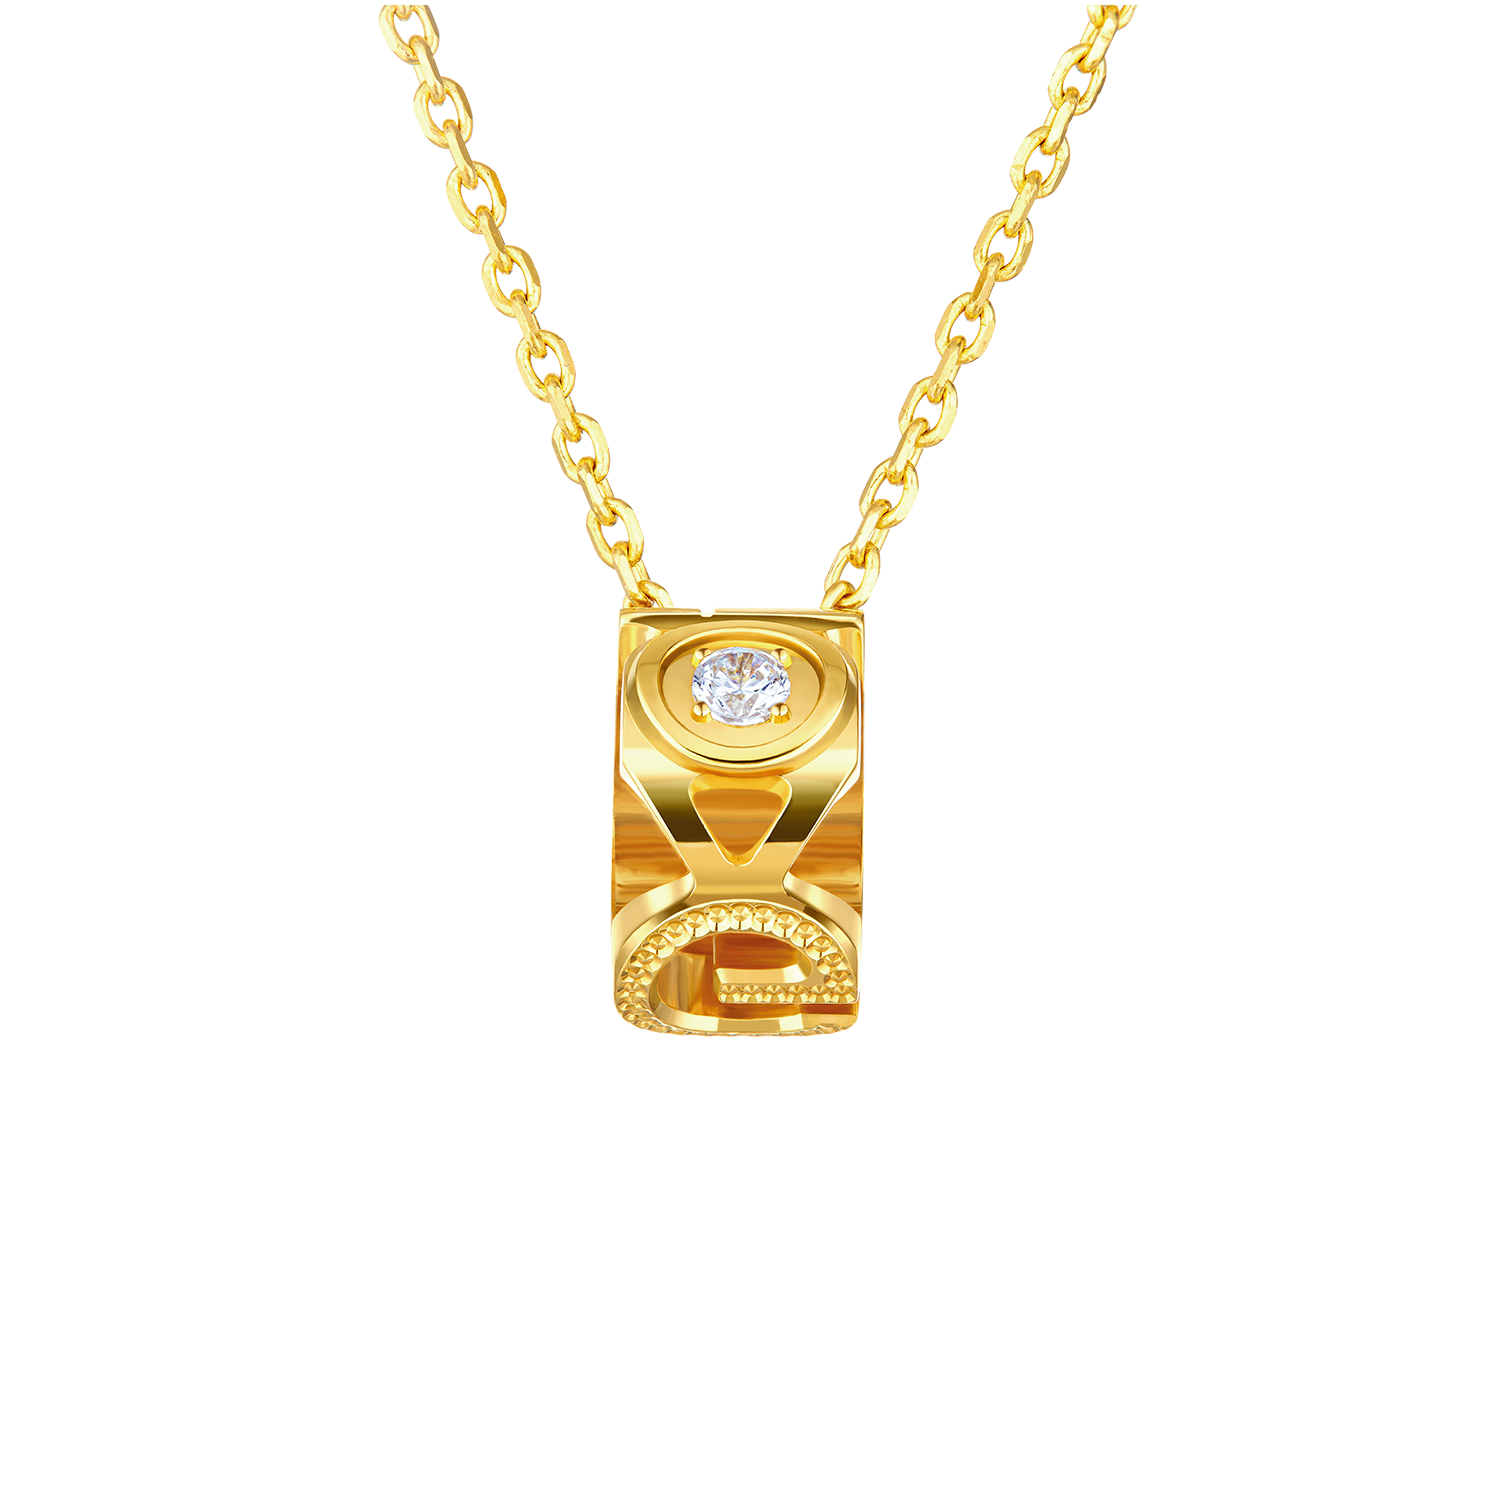 Goldstyle•X "Moment of Love and Bliss" Gold Diamond Necklace